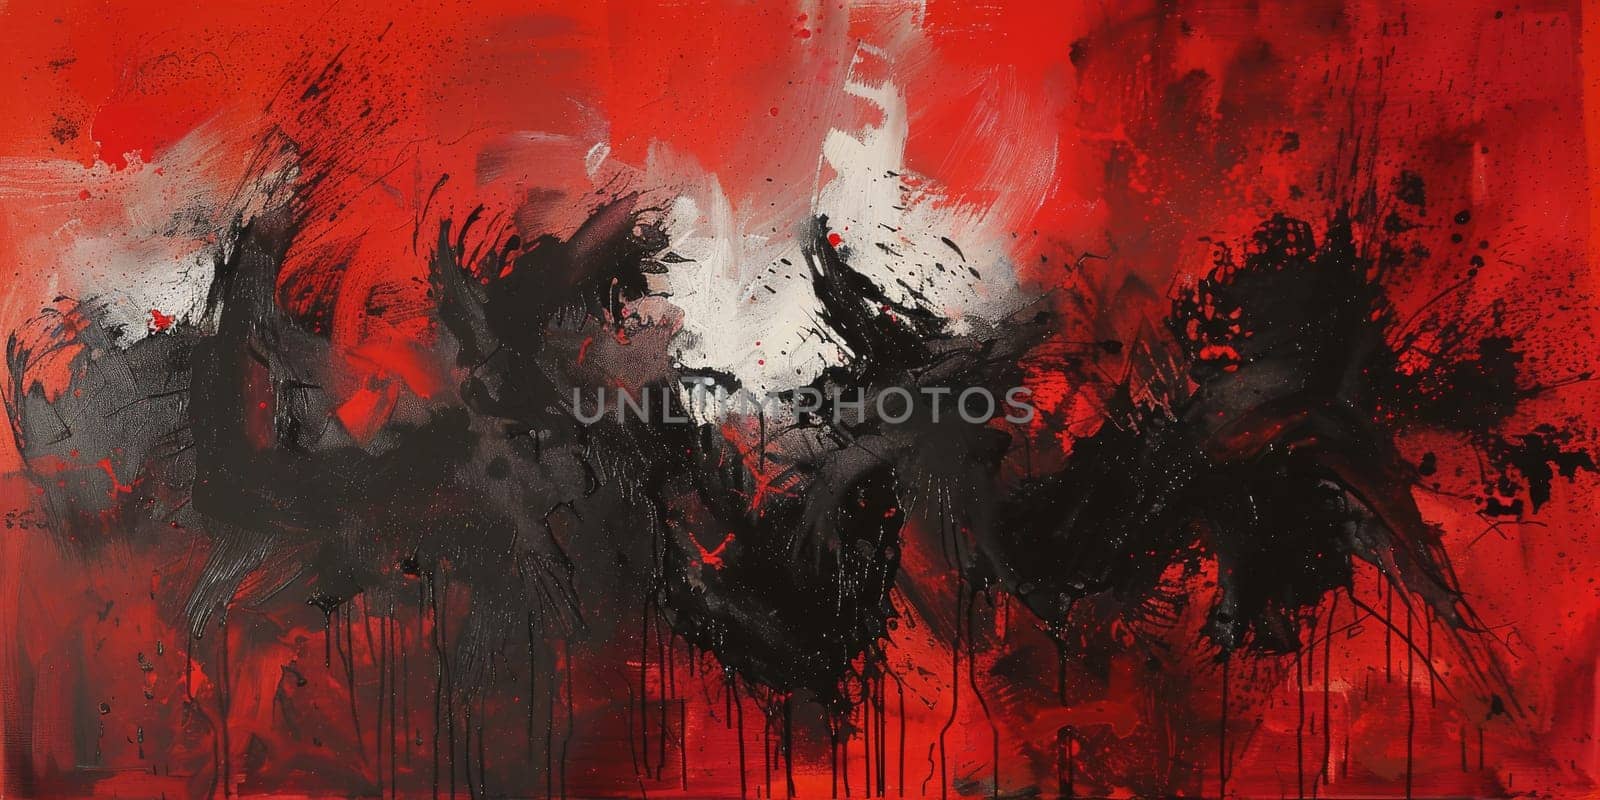 Abstract artwork featuring swirling black and red colors in vibrant composition